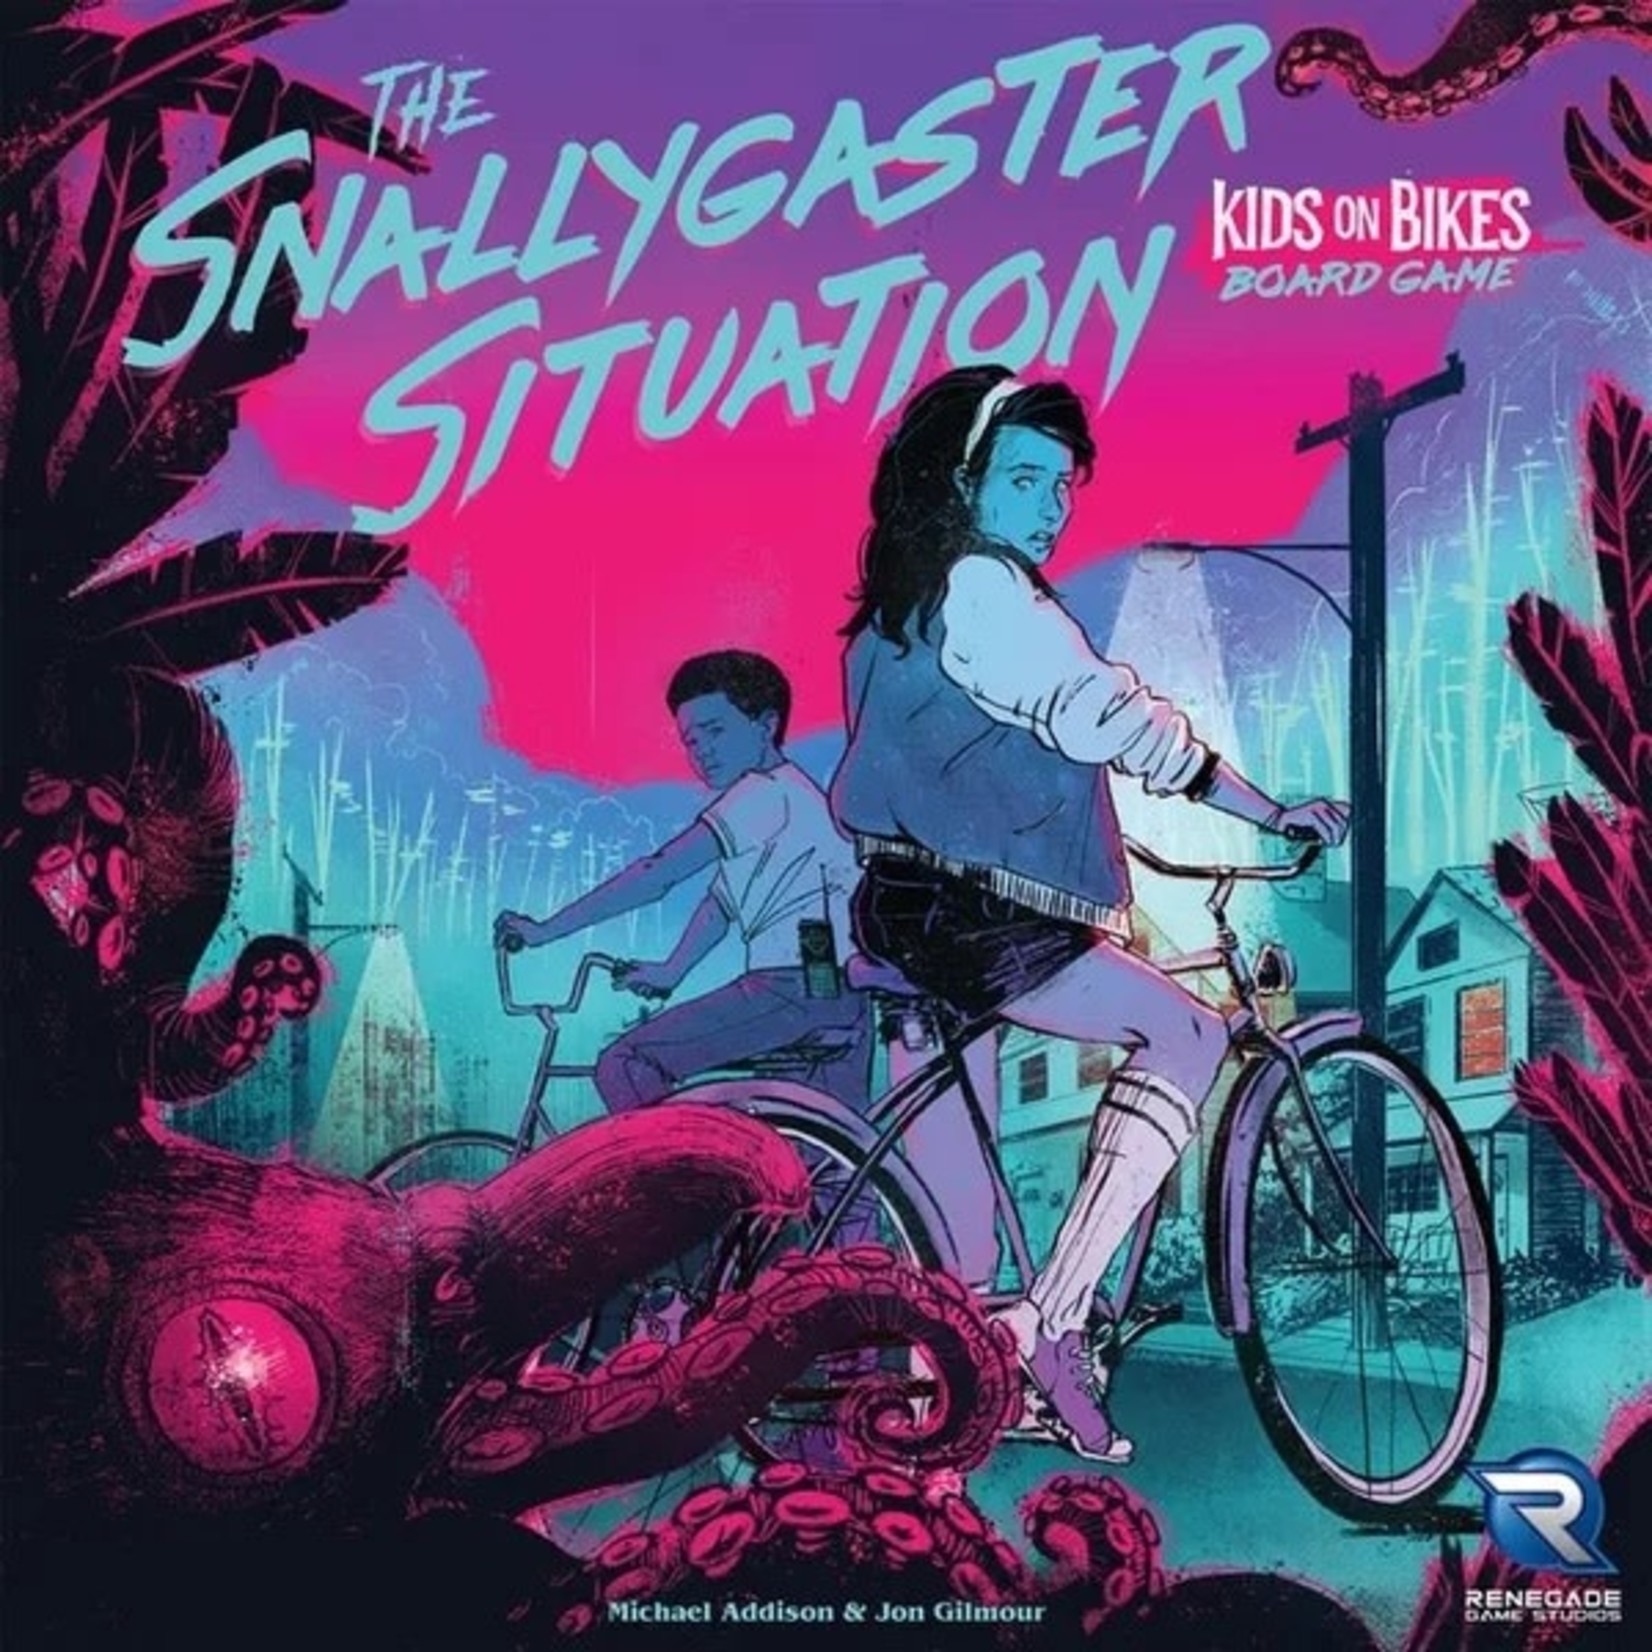 Renegade Game Studios The Snallygaster Situation: A Kids on Bikes Board Game